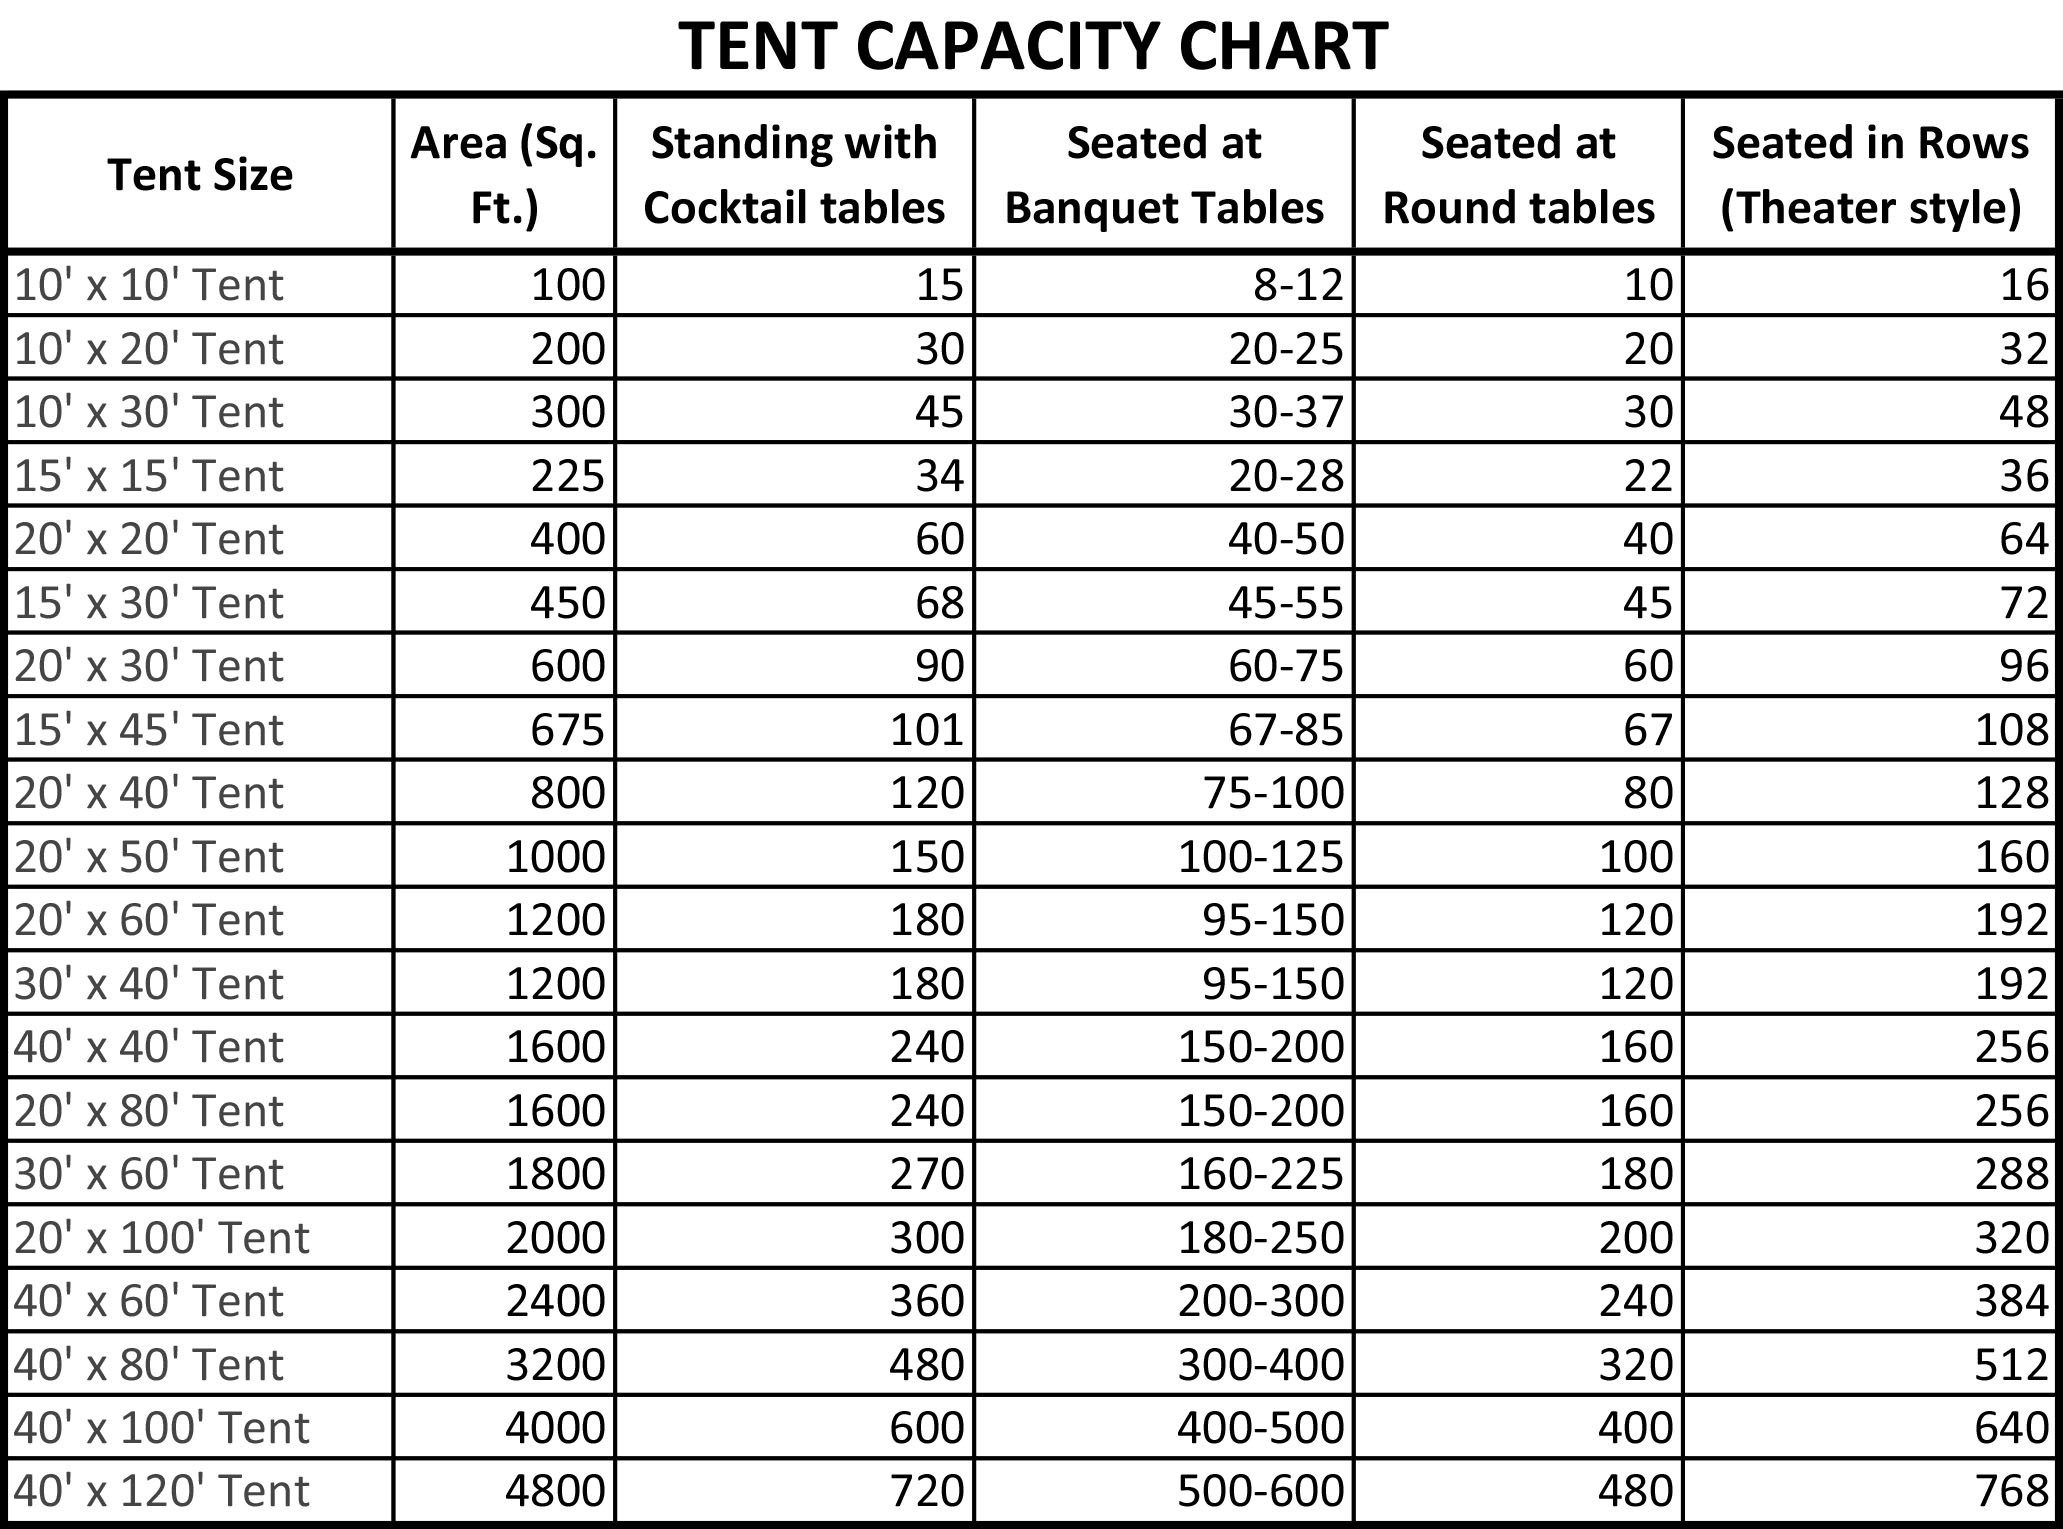 conference center capacity chart pdf